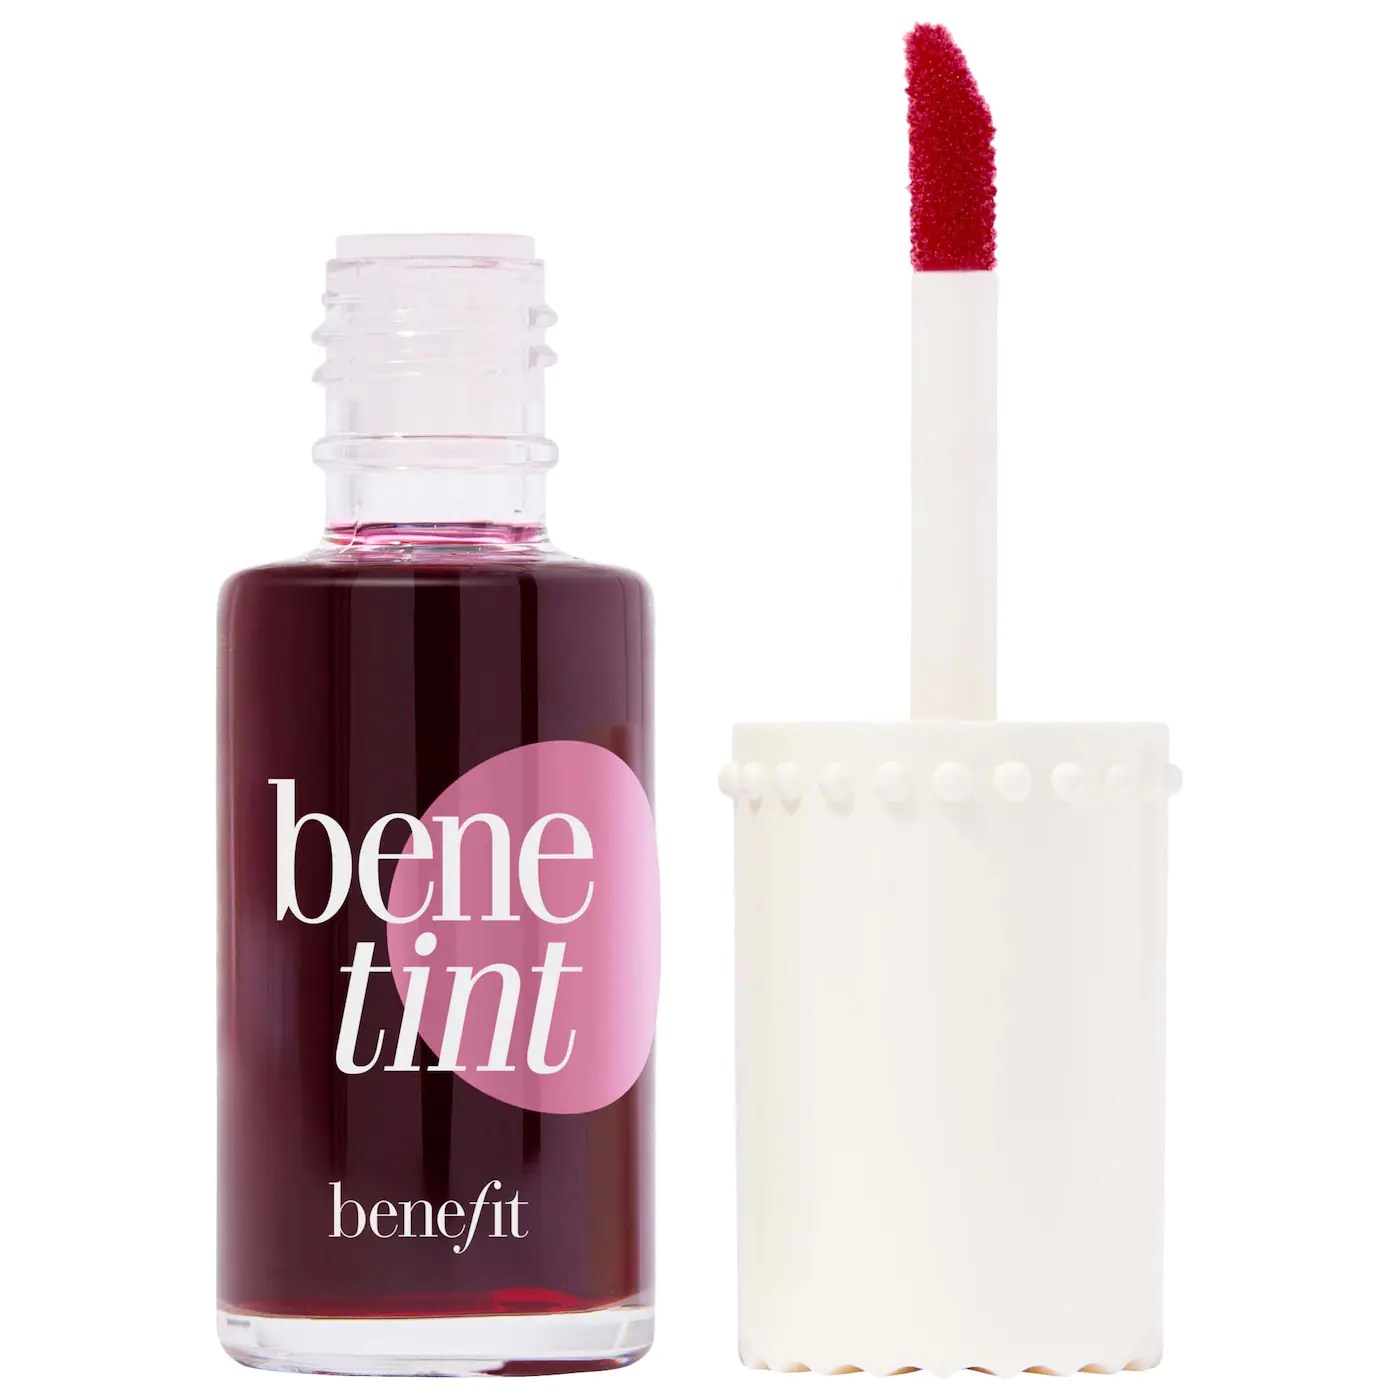 benefit benetint lip and cheek tint for the i'm cold makeup look on a white background